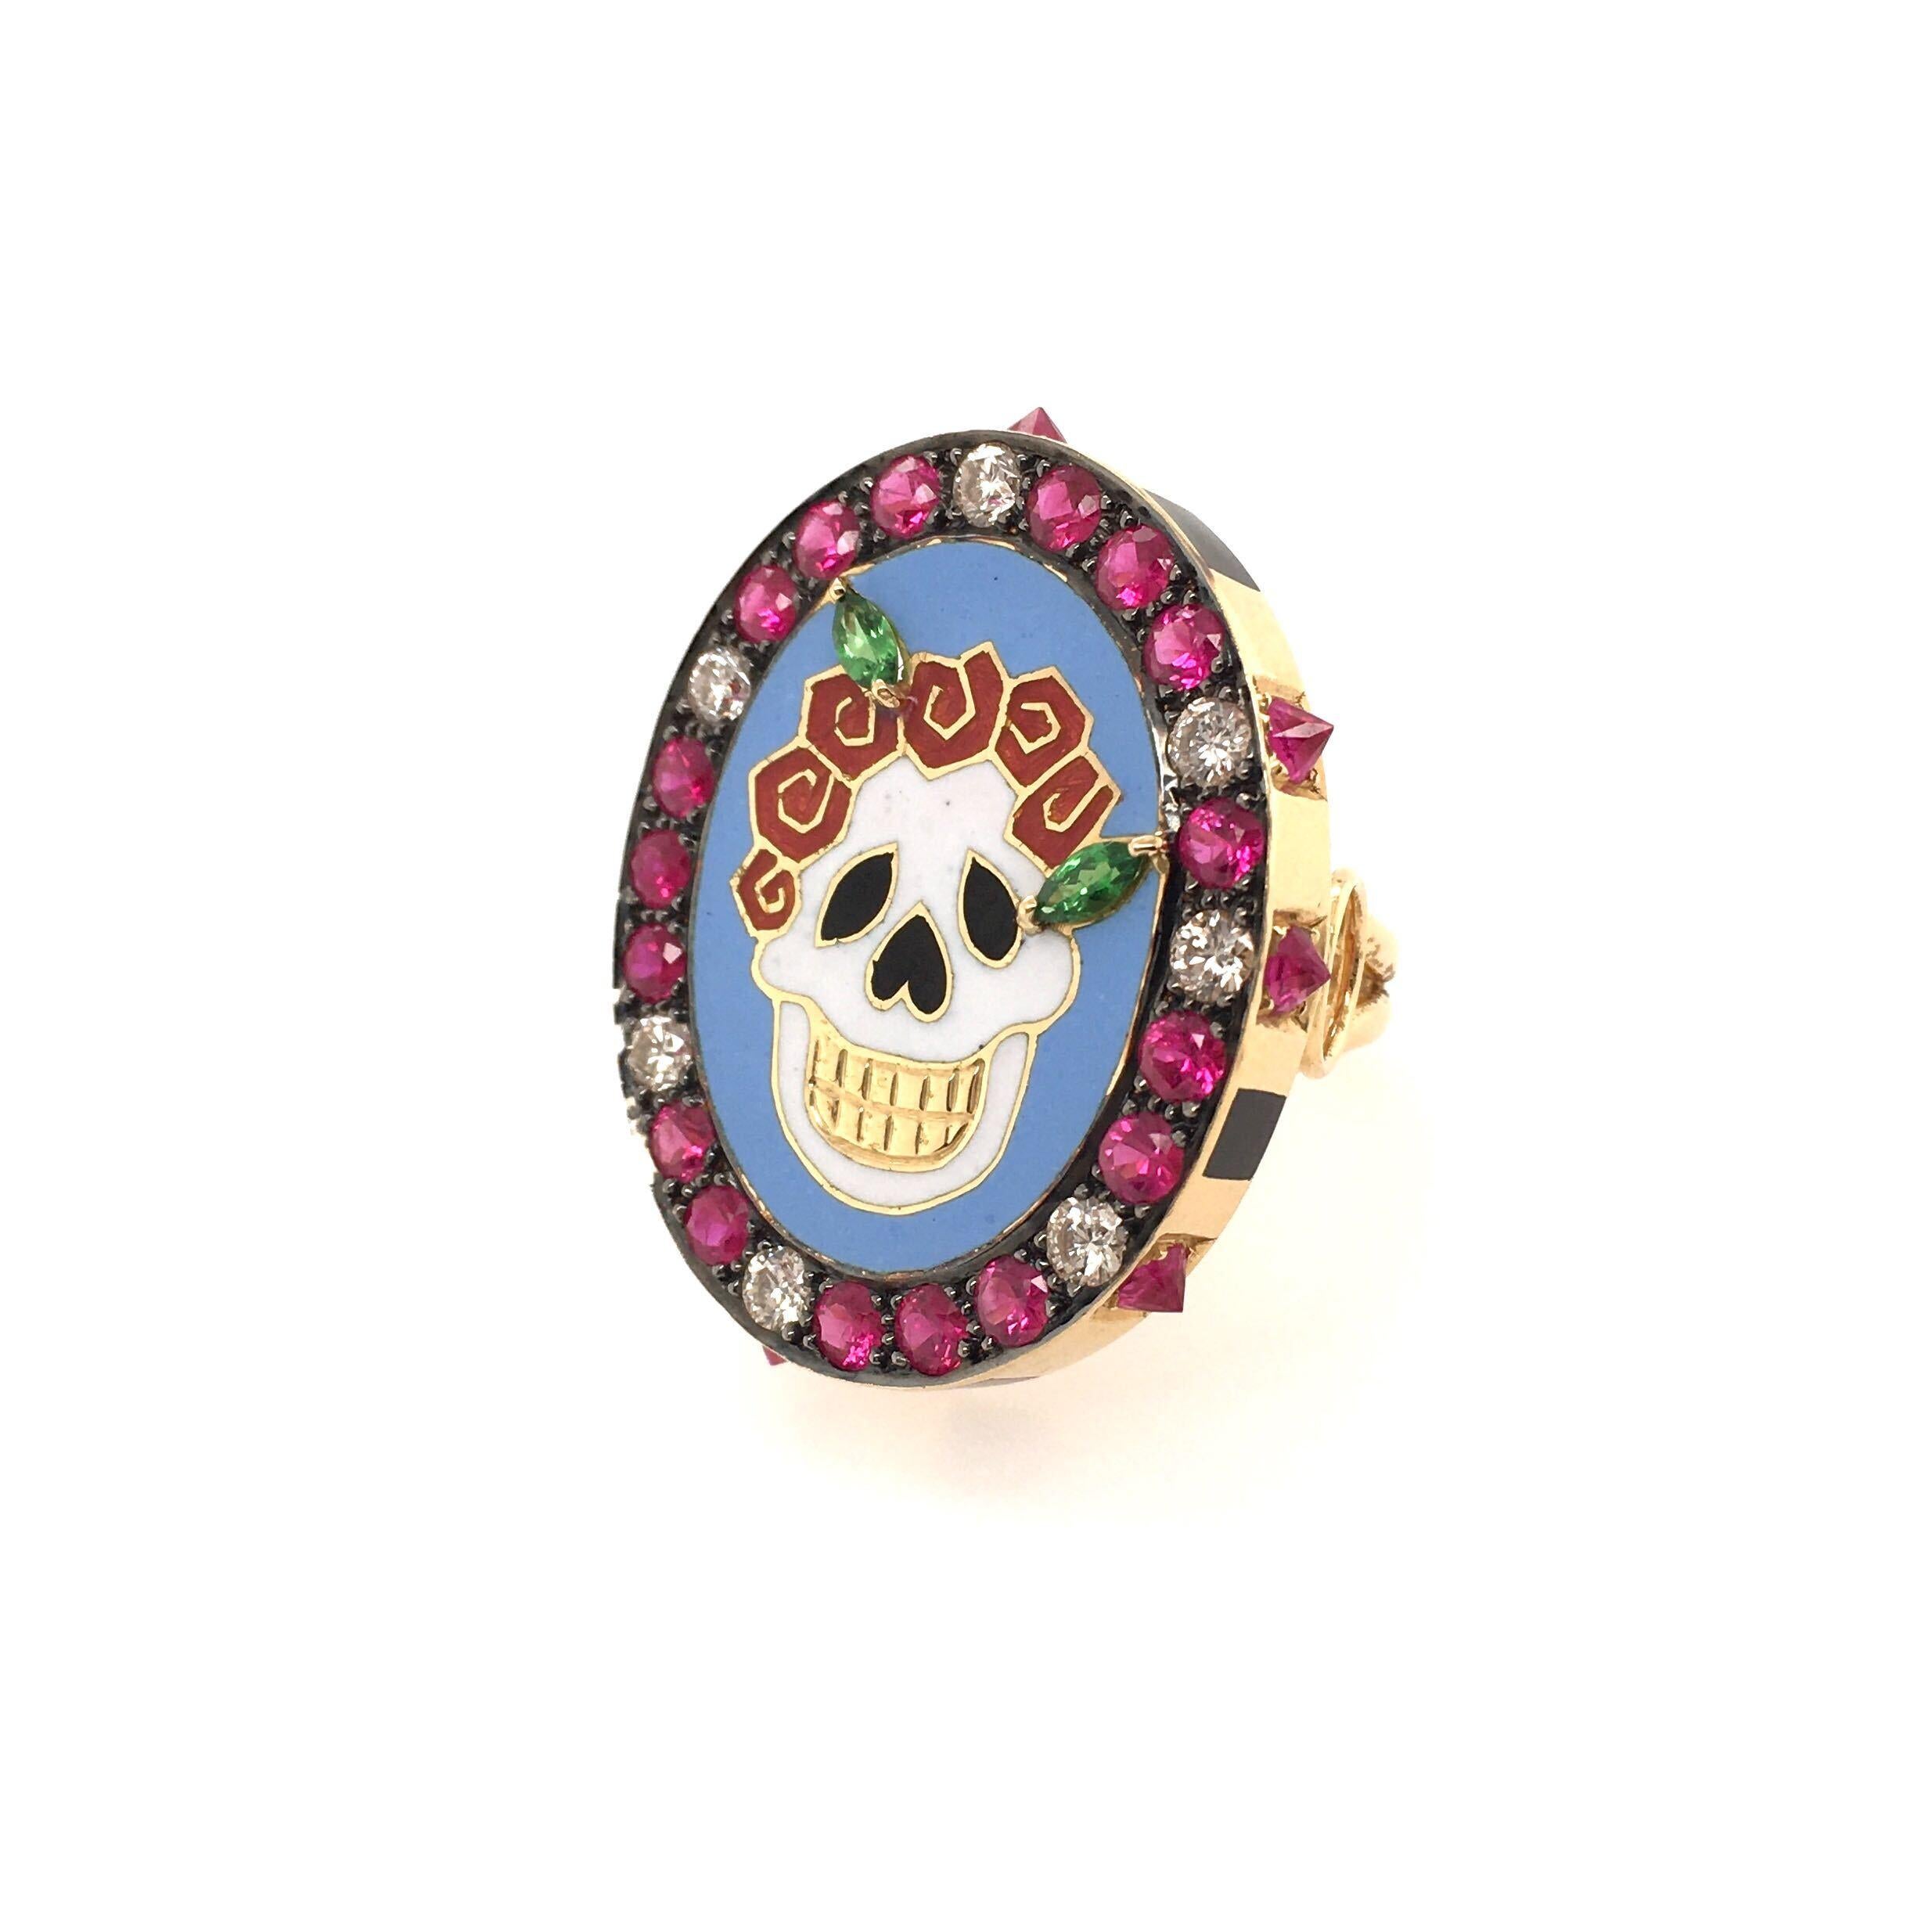 An 18 karat yellow gold, enamel and gemset Skull ring. Holly Dyment. Designed as an white, cream and black enamel skull, against a light blue background, wearing a crown of red flowers, enhanced by tsavorite garnet leaves, within a circular cut ruby